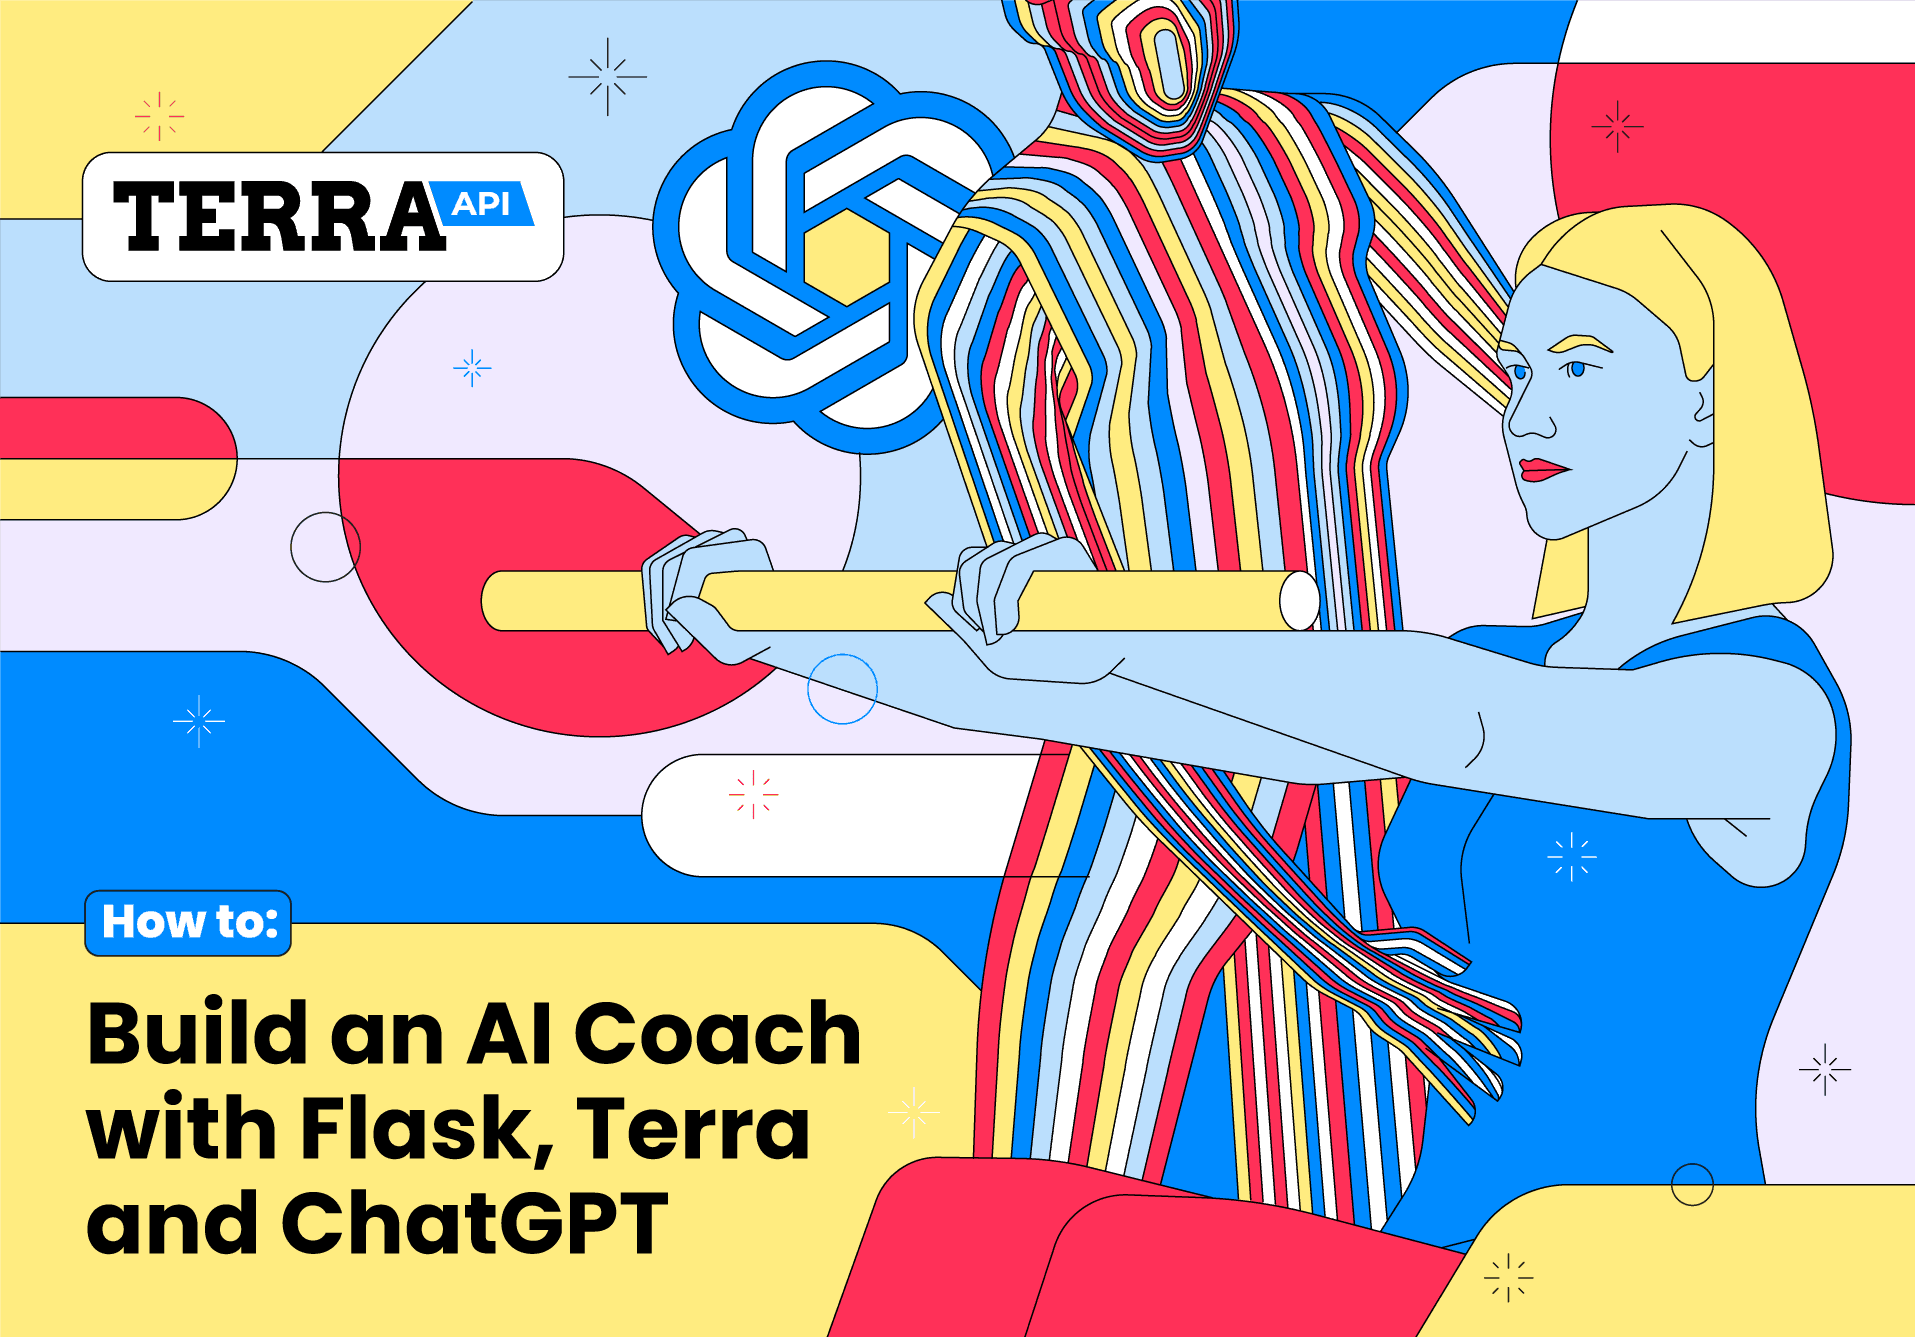 How to Build an AI Coach with Flask, Terra and ChatGPT